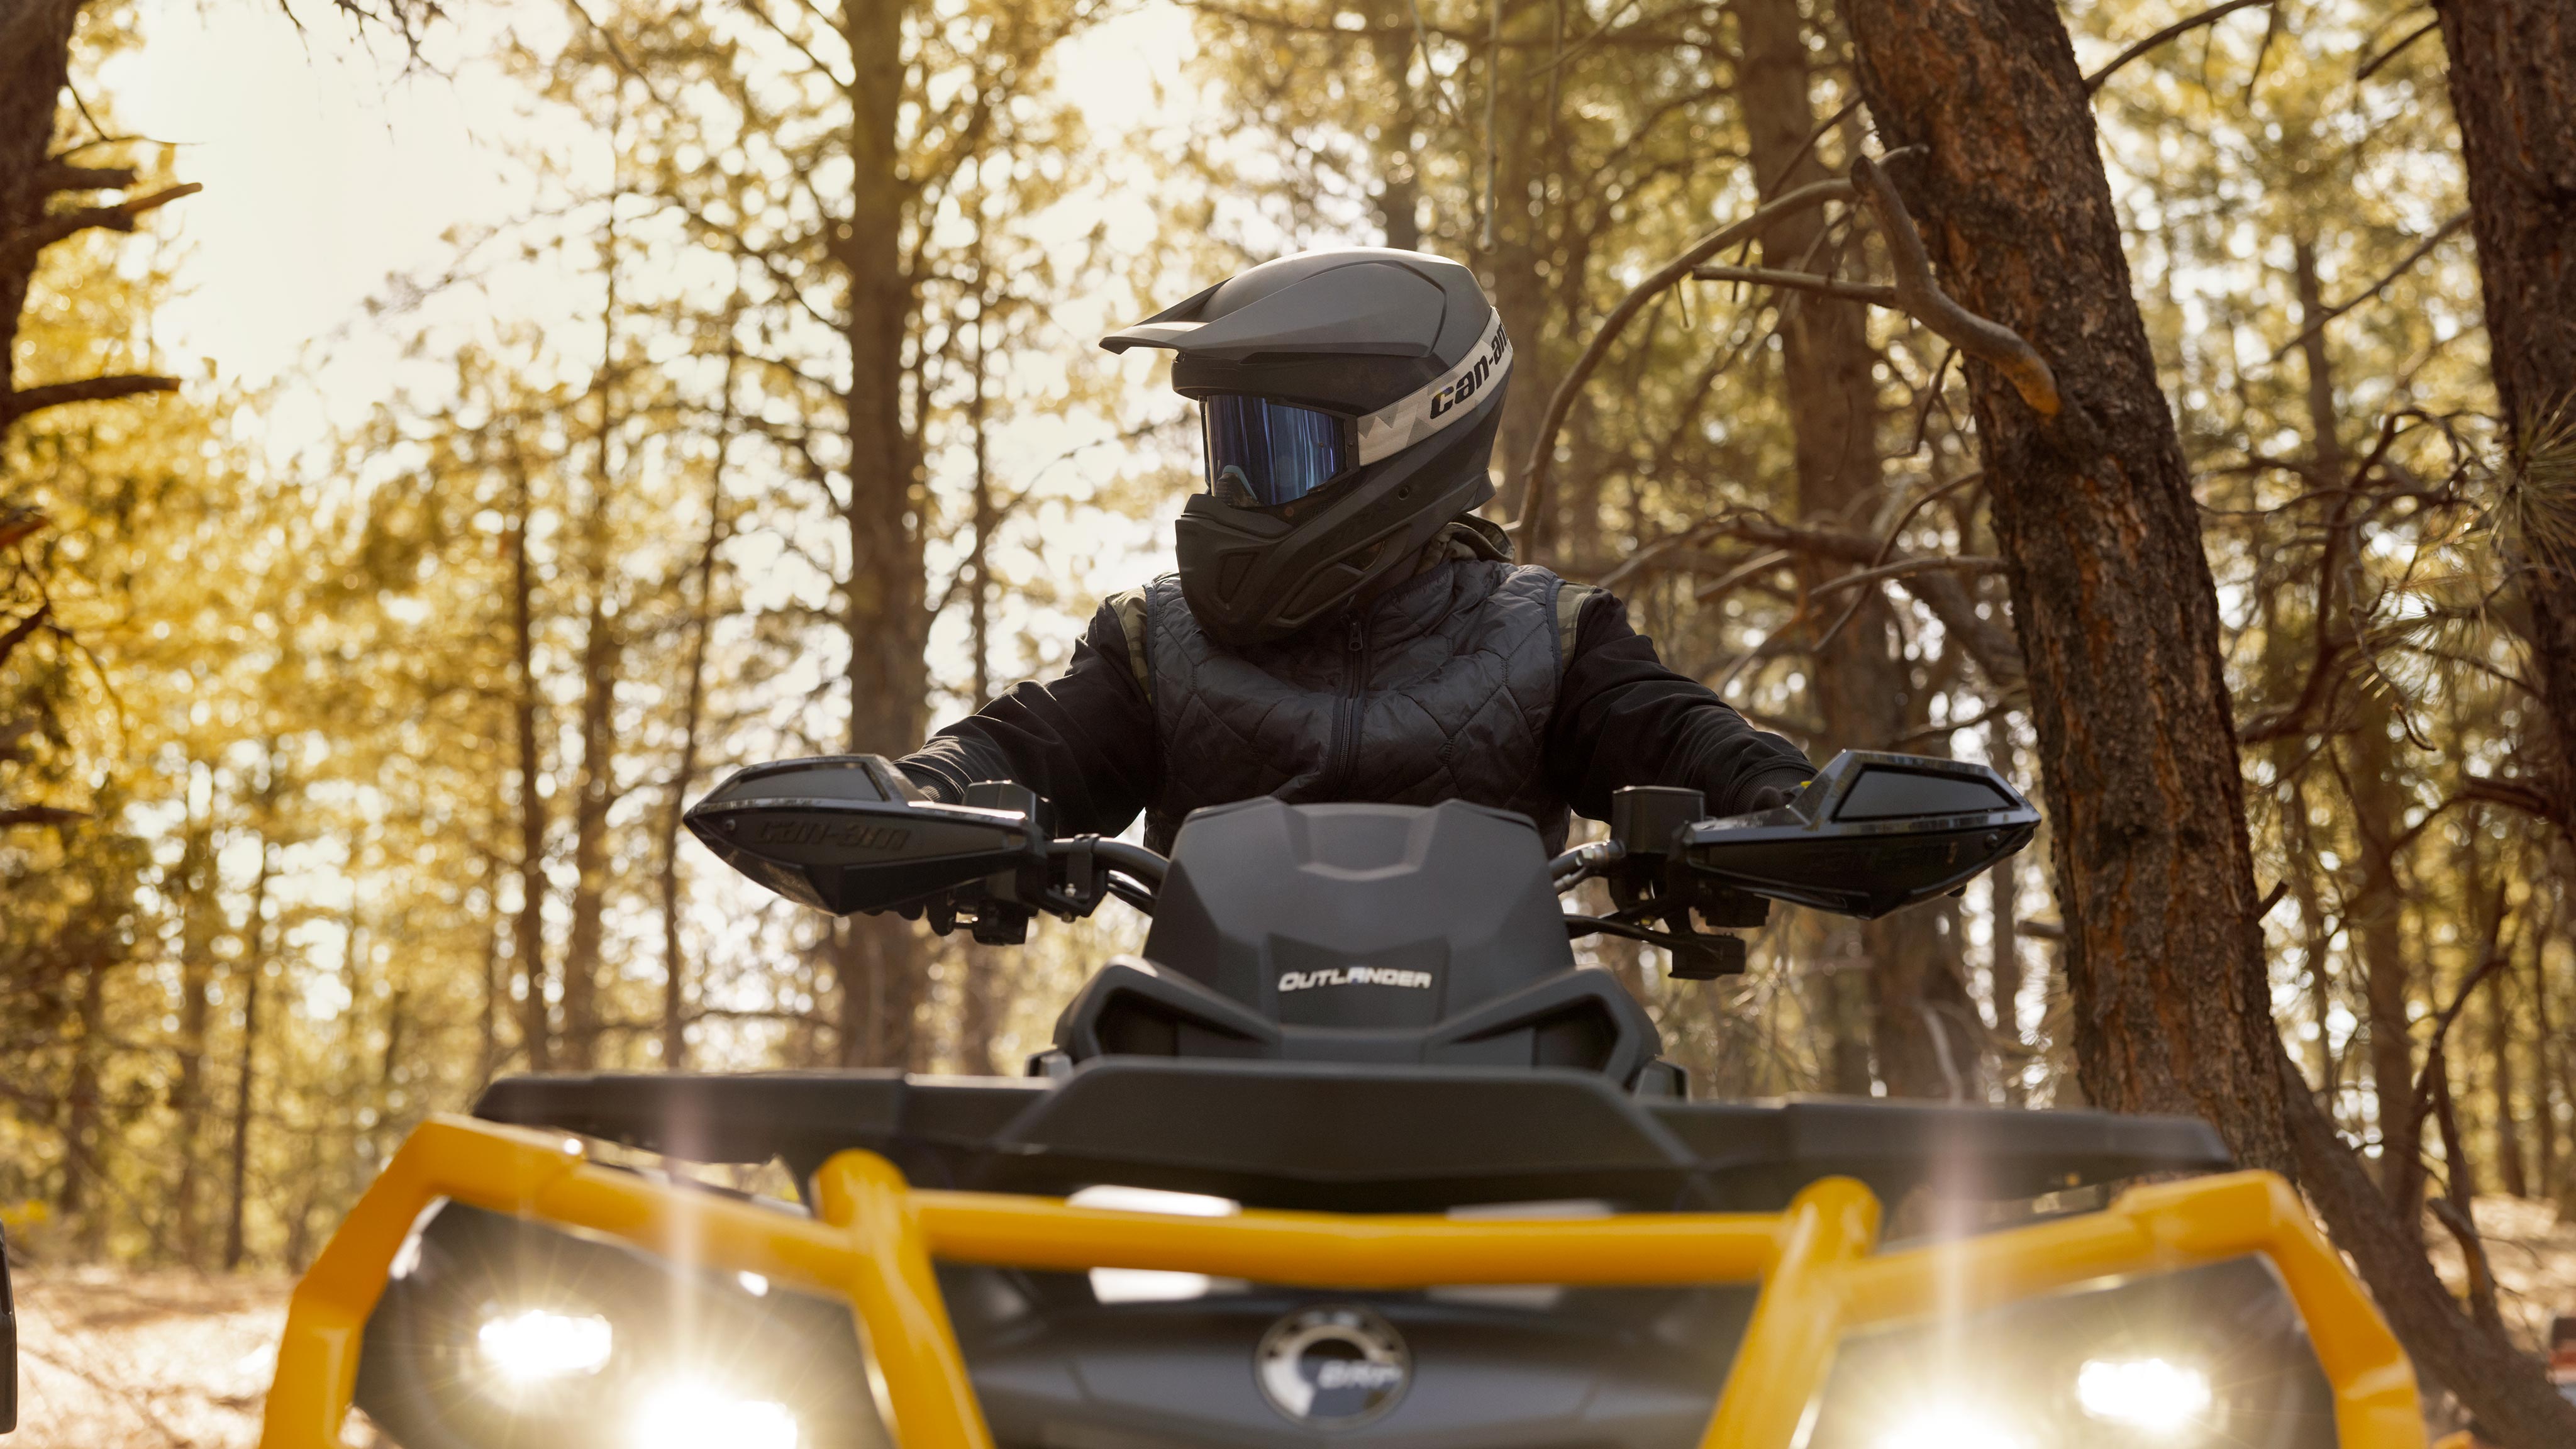 Driving a Can-Am Outlander ATV in a forest 